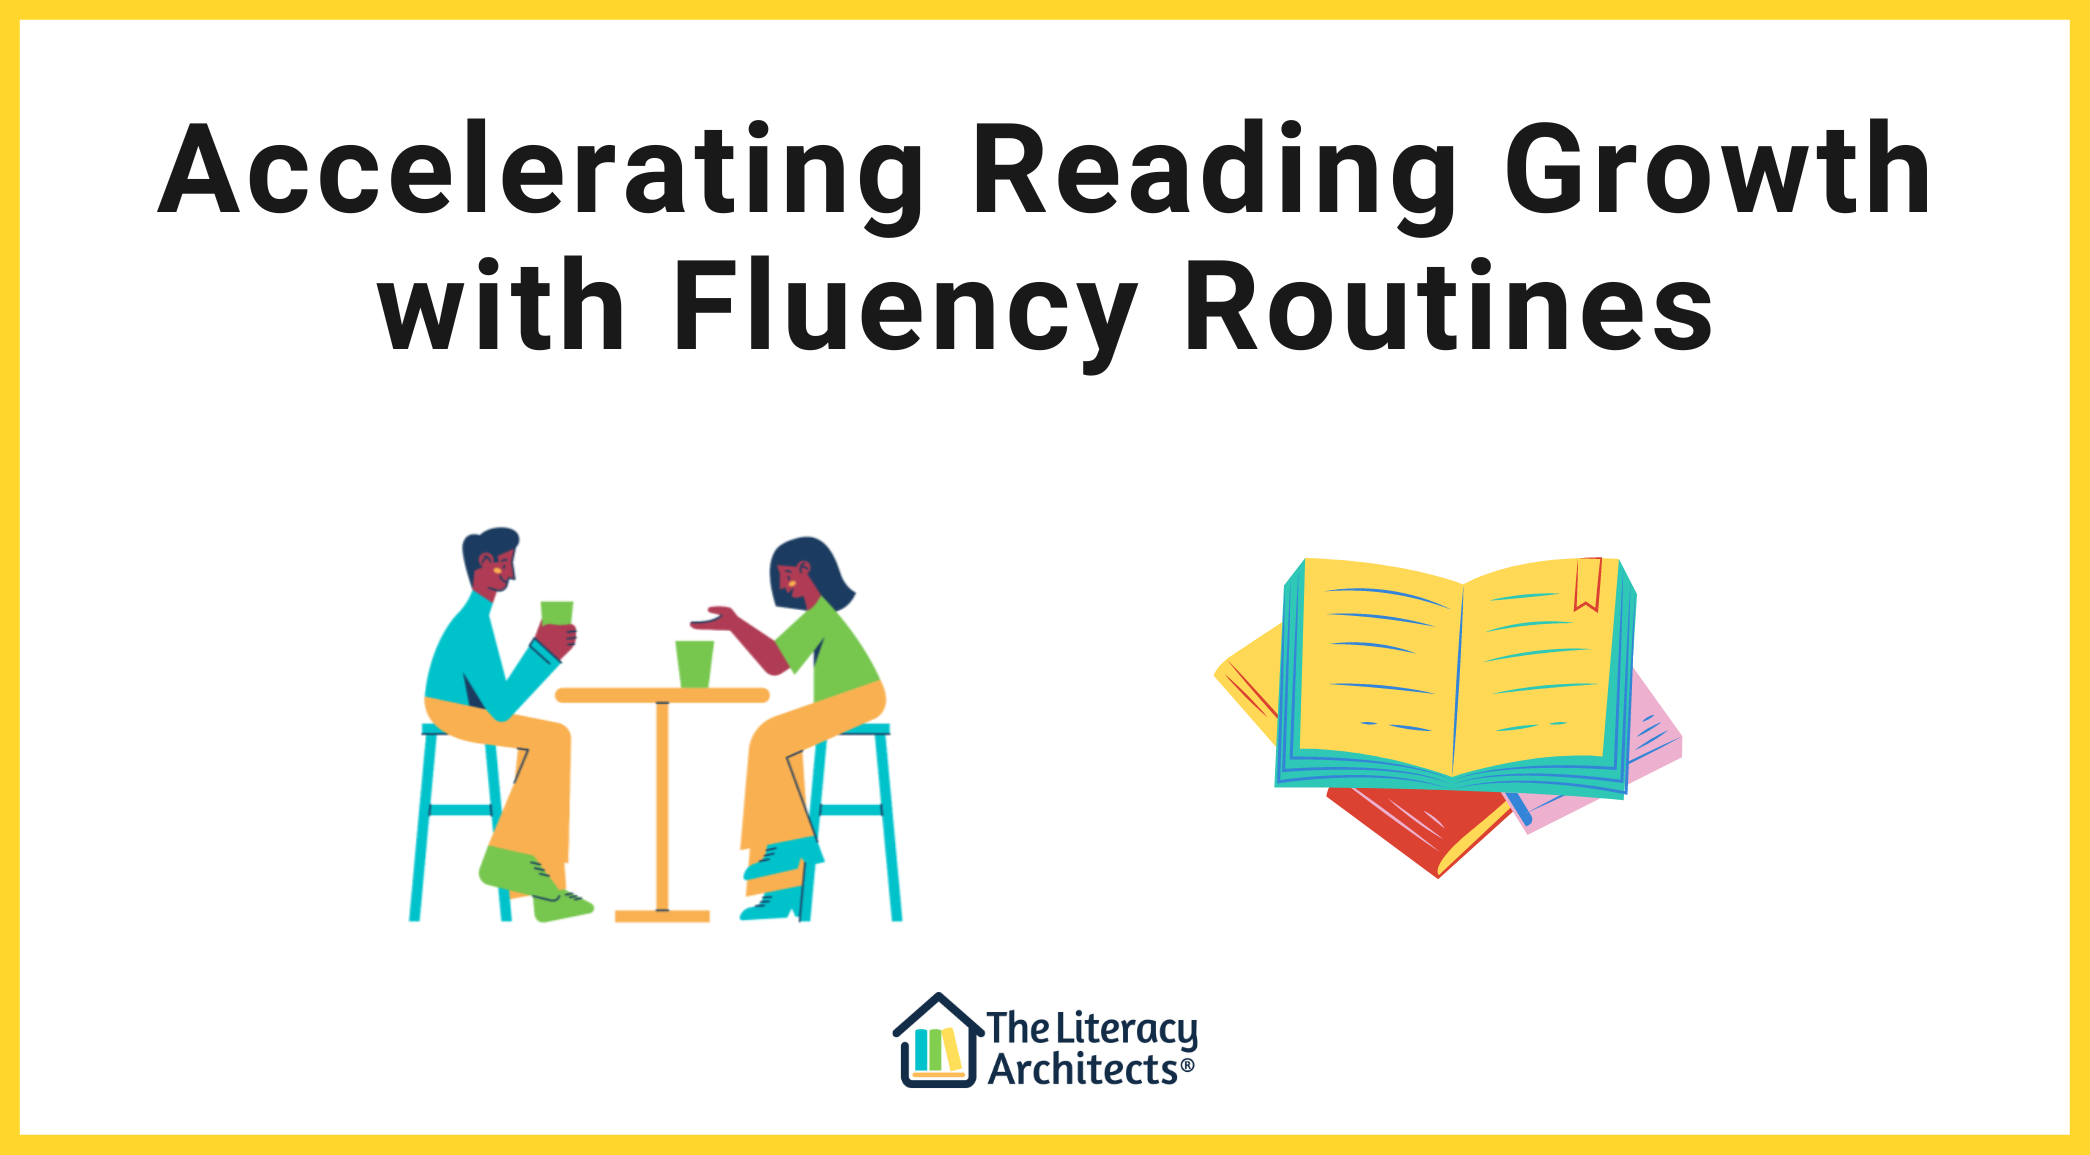 Accelerating reading growth with fluency routines